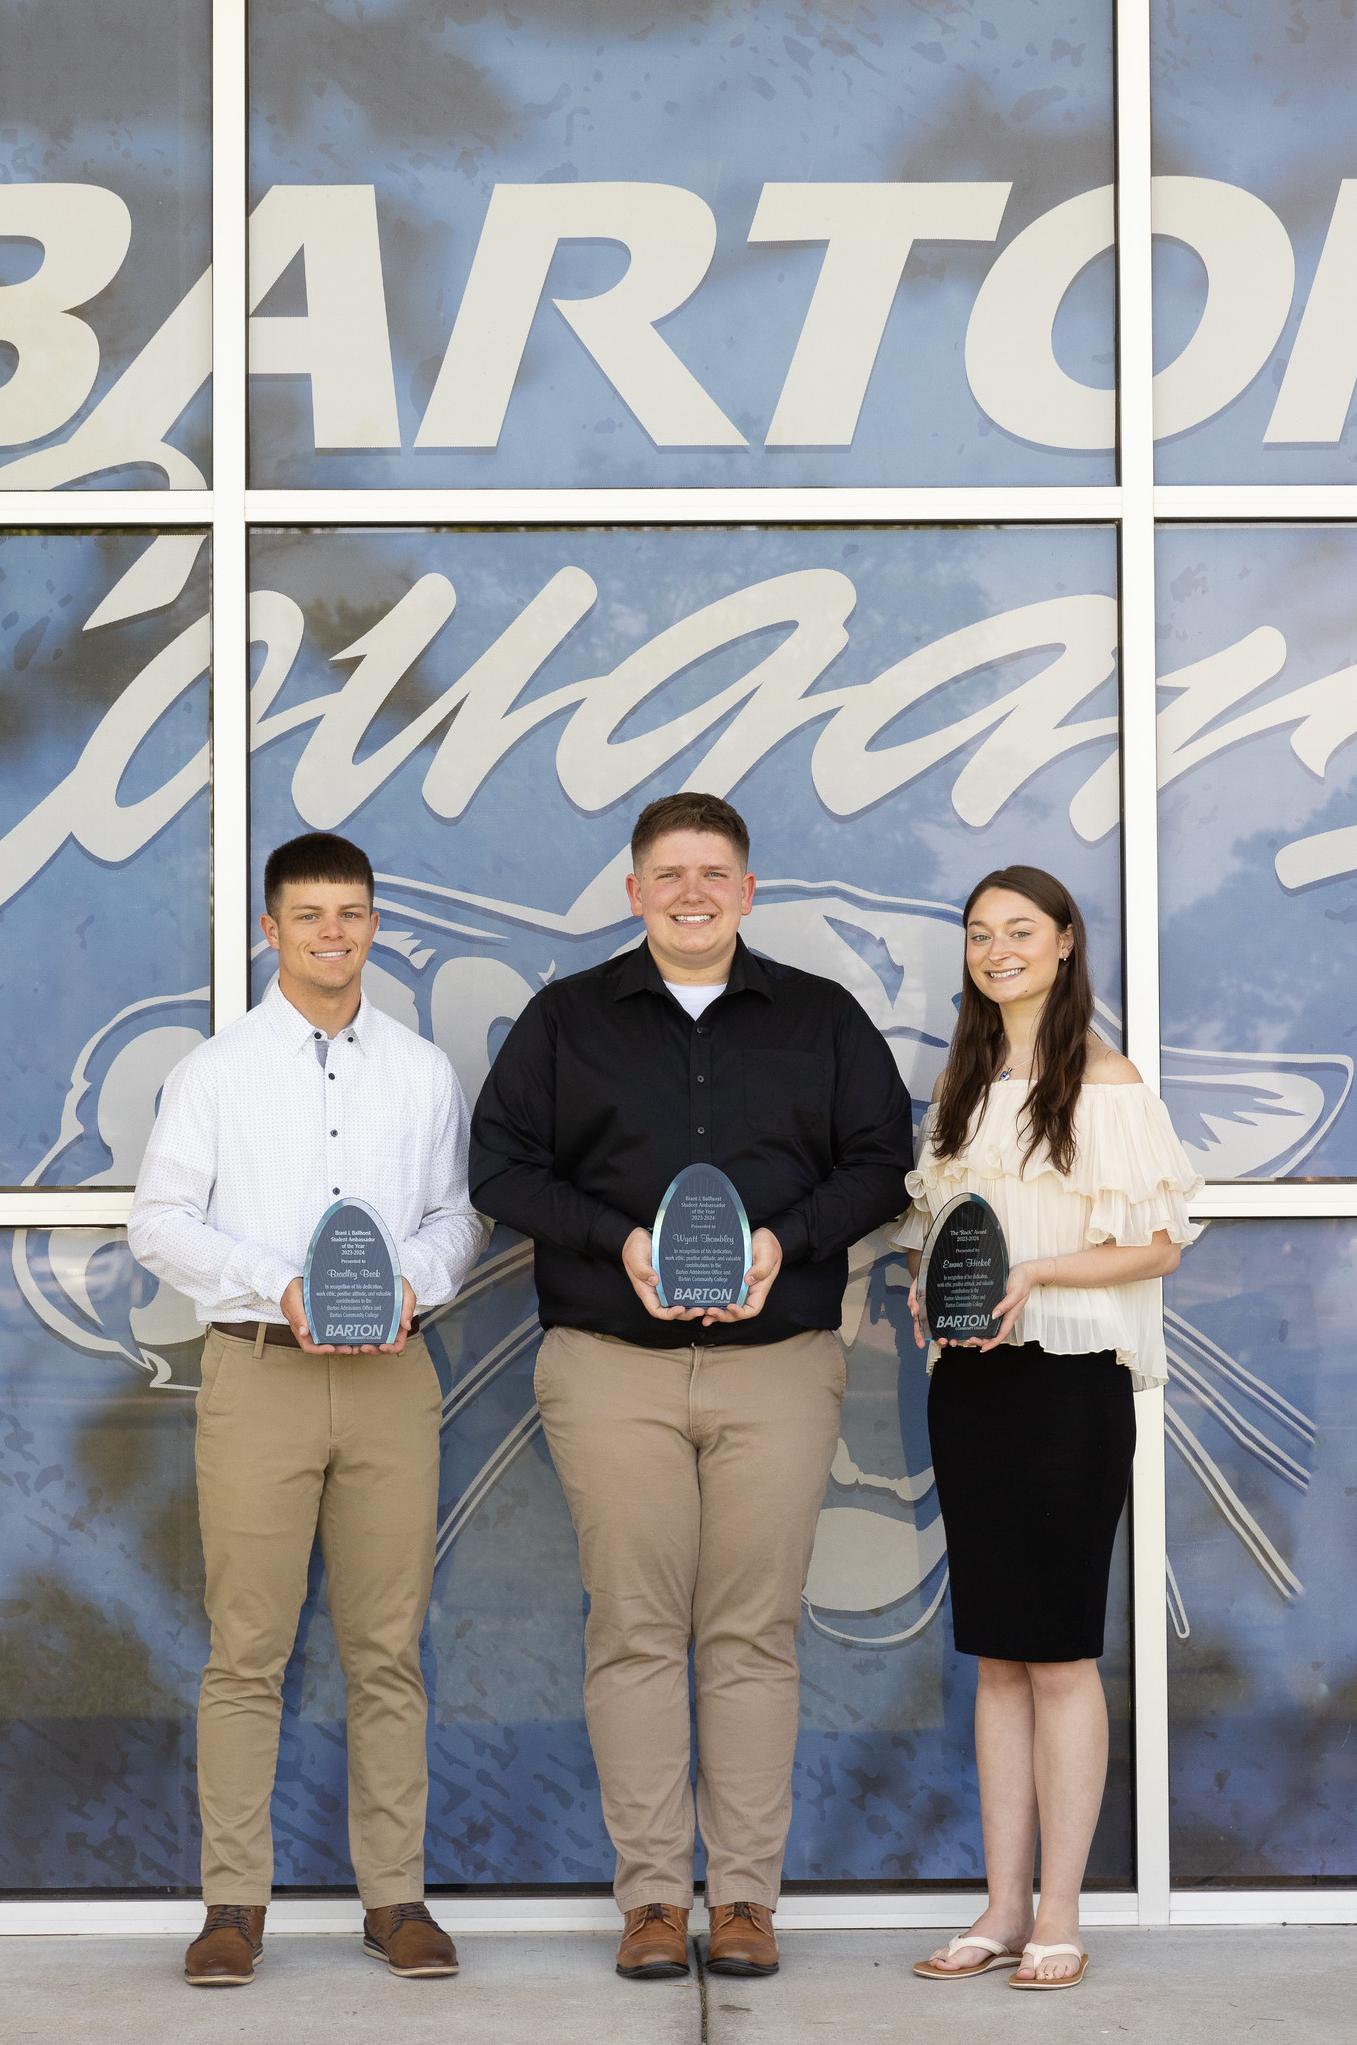 3 people holding awards in front of a blue backdrop